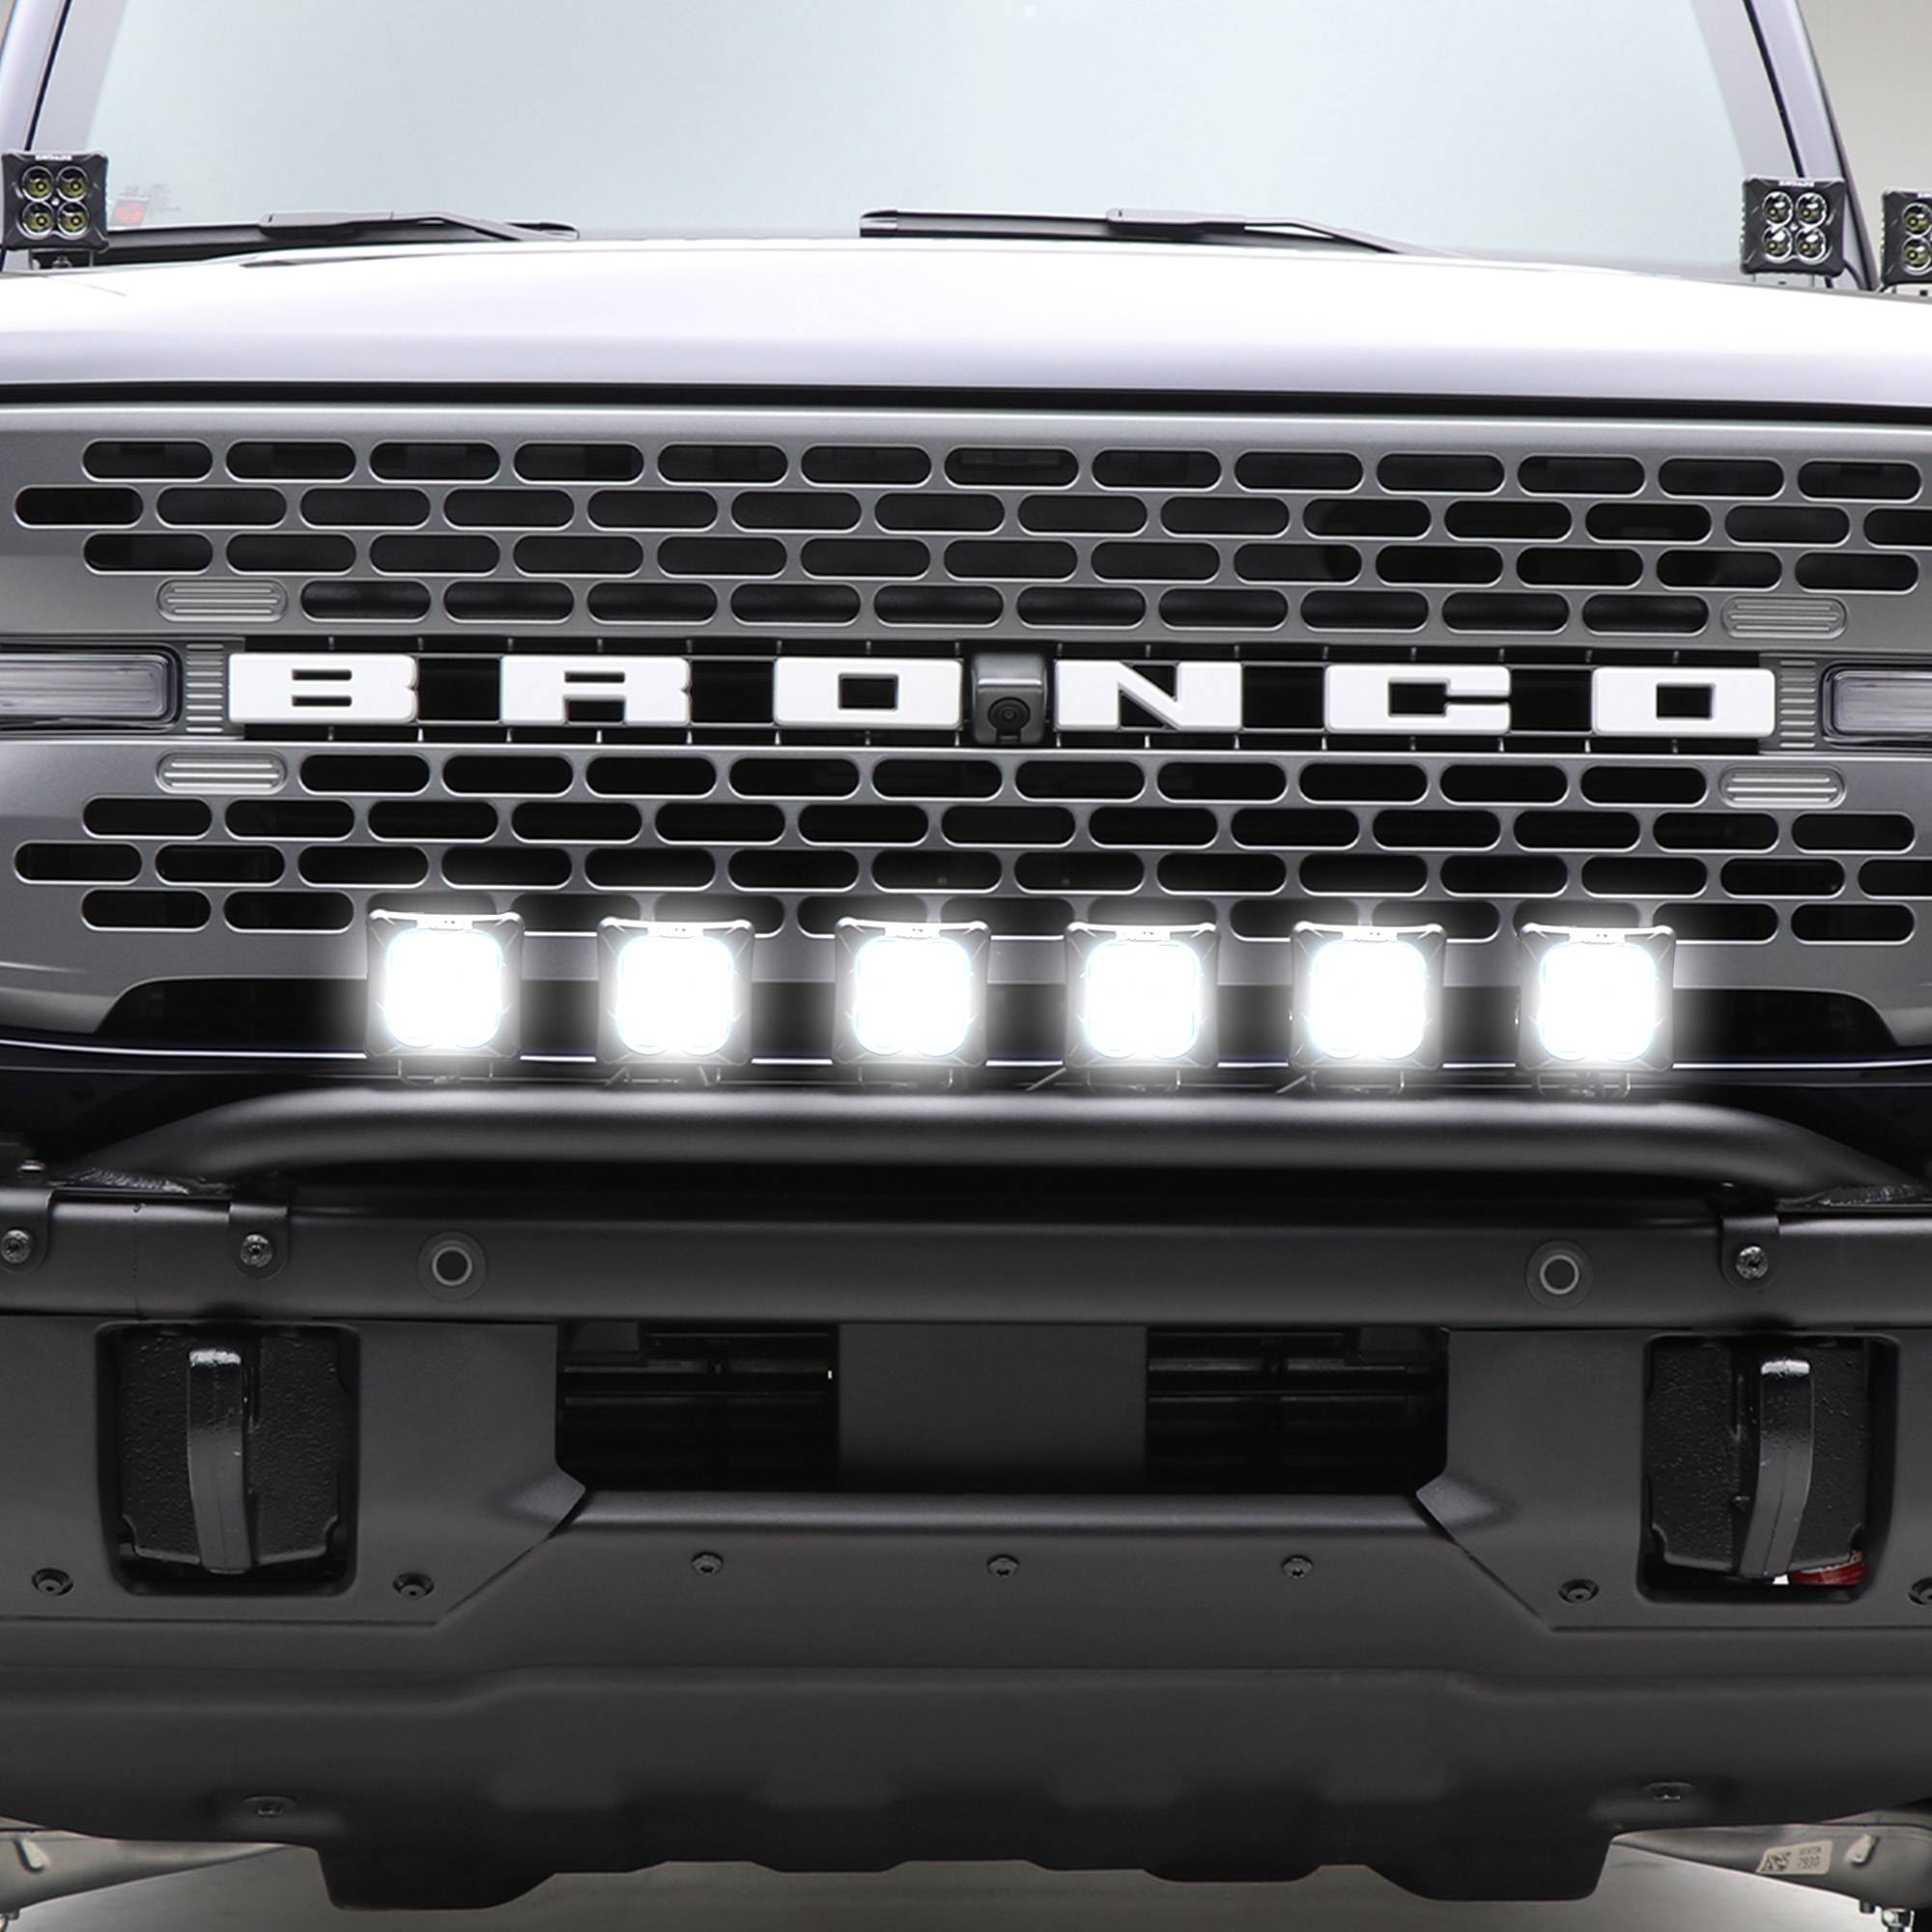 ZROADZ OFF ROAD PRODUCTS - 2021-2022 Ford Bronco Front Bumper Top LED KIT, Includes (6) 3 inch ZROADZ LED Light Pods - Part # Z325431-KIT